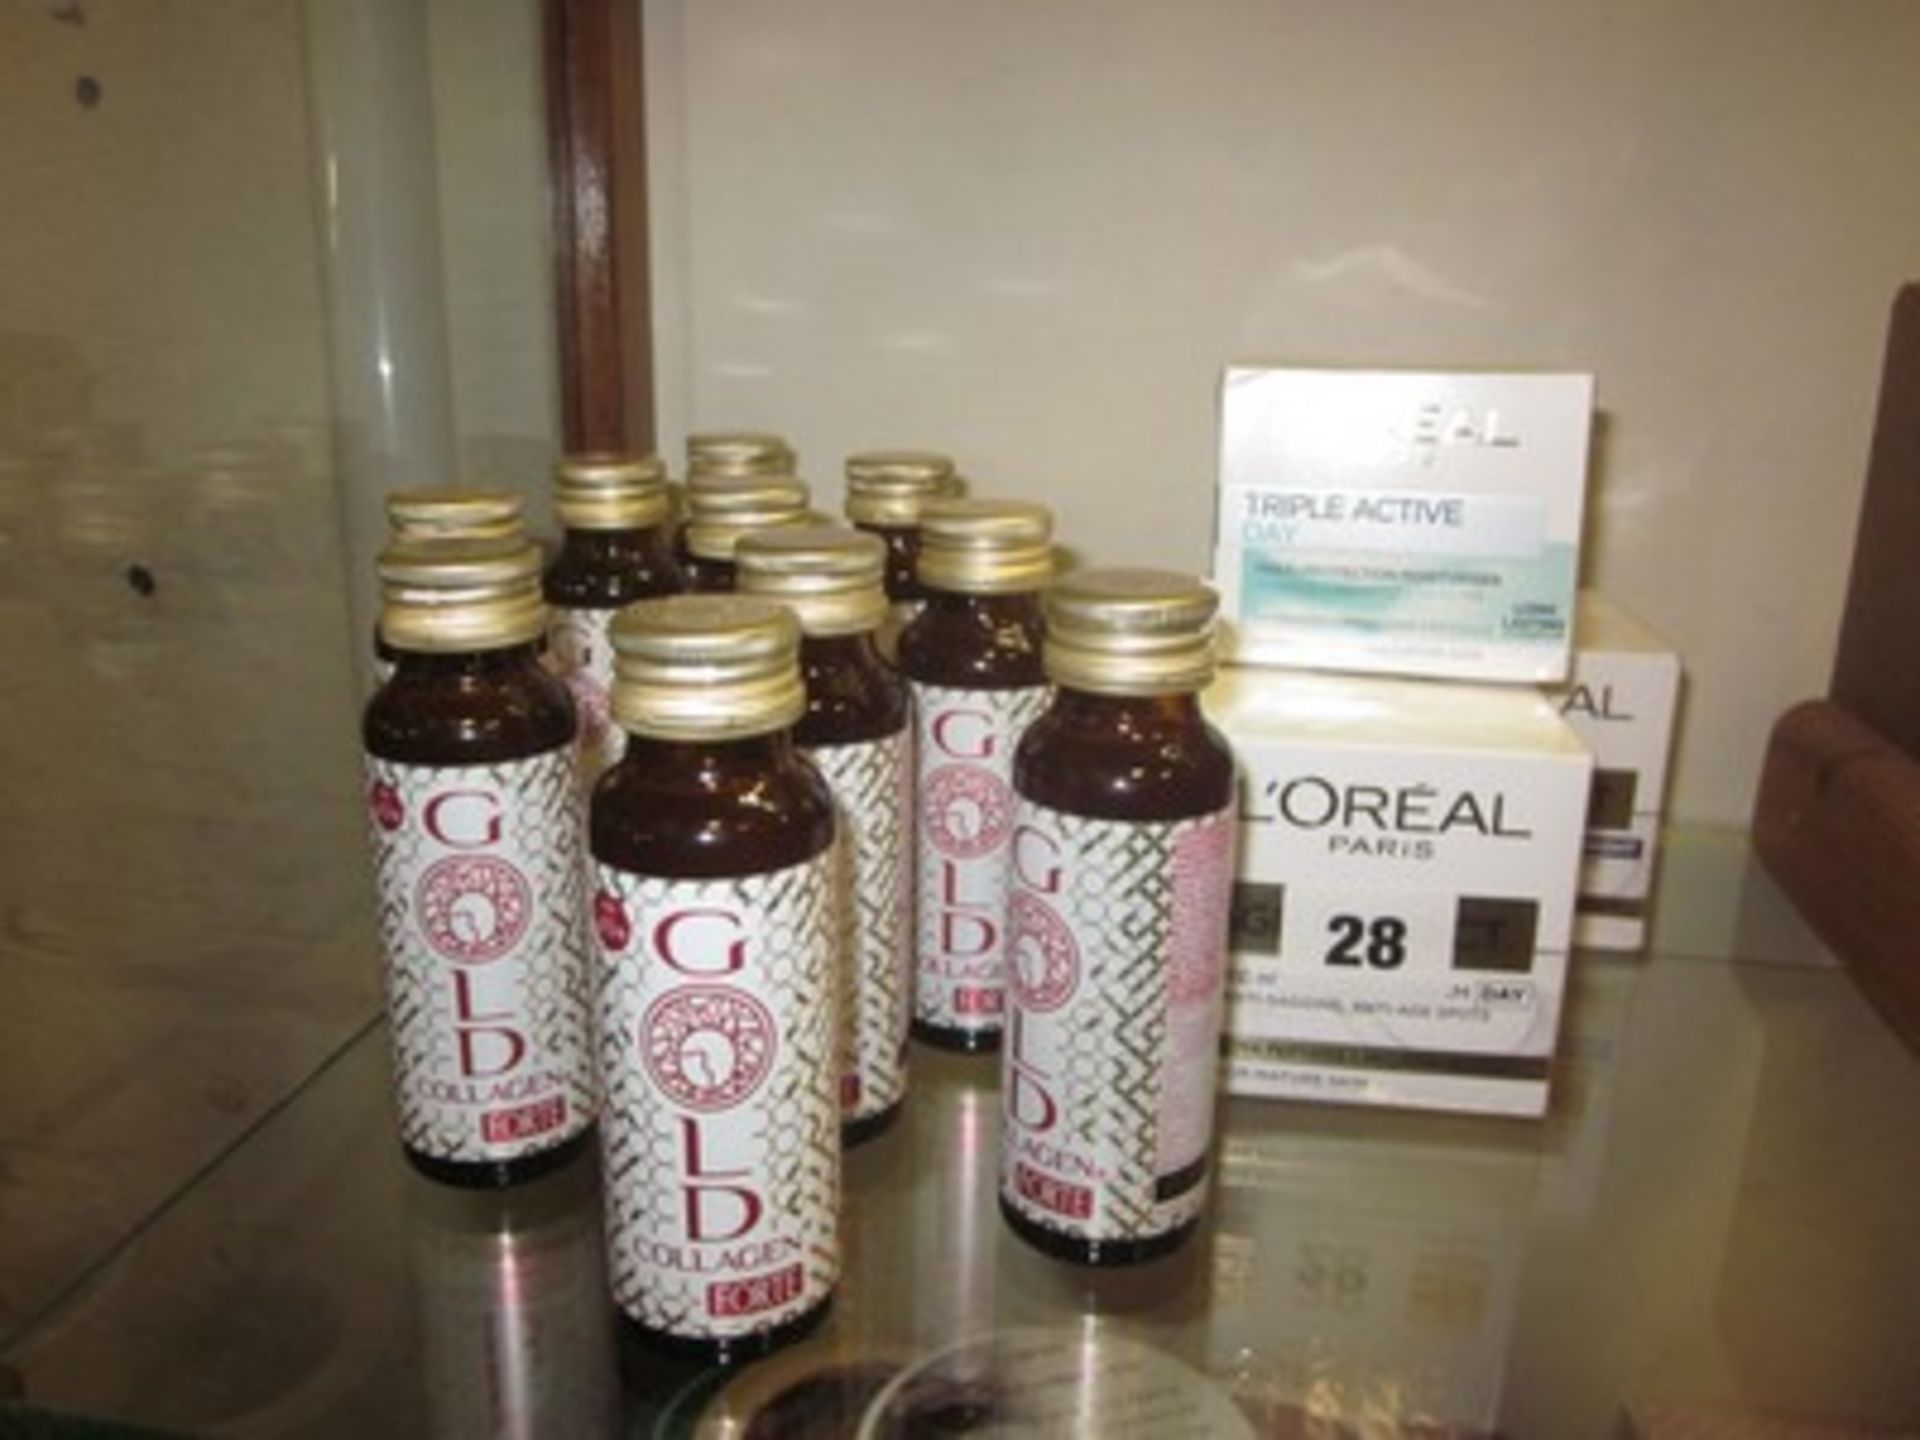 A quantity of skincare products to include ten bottles of Gold Collagen Forte, Age Perfect